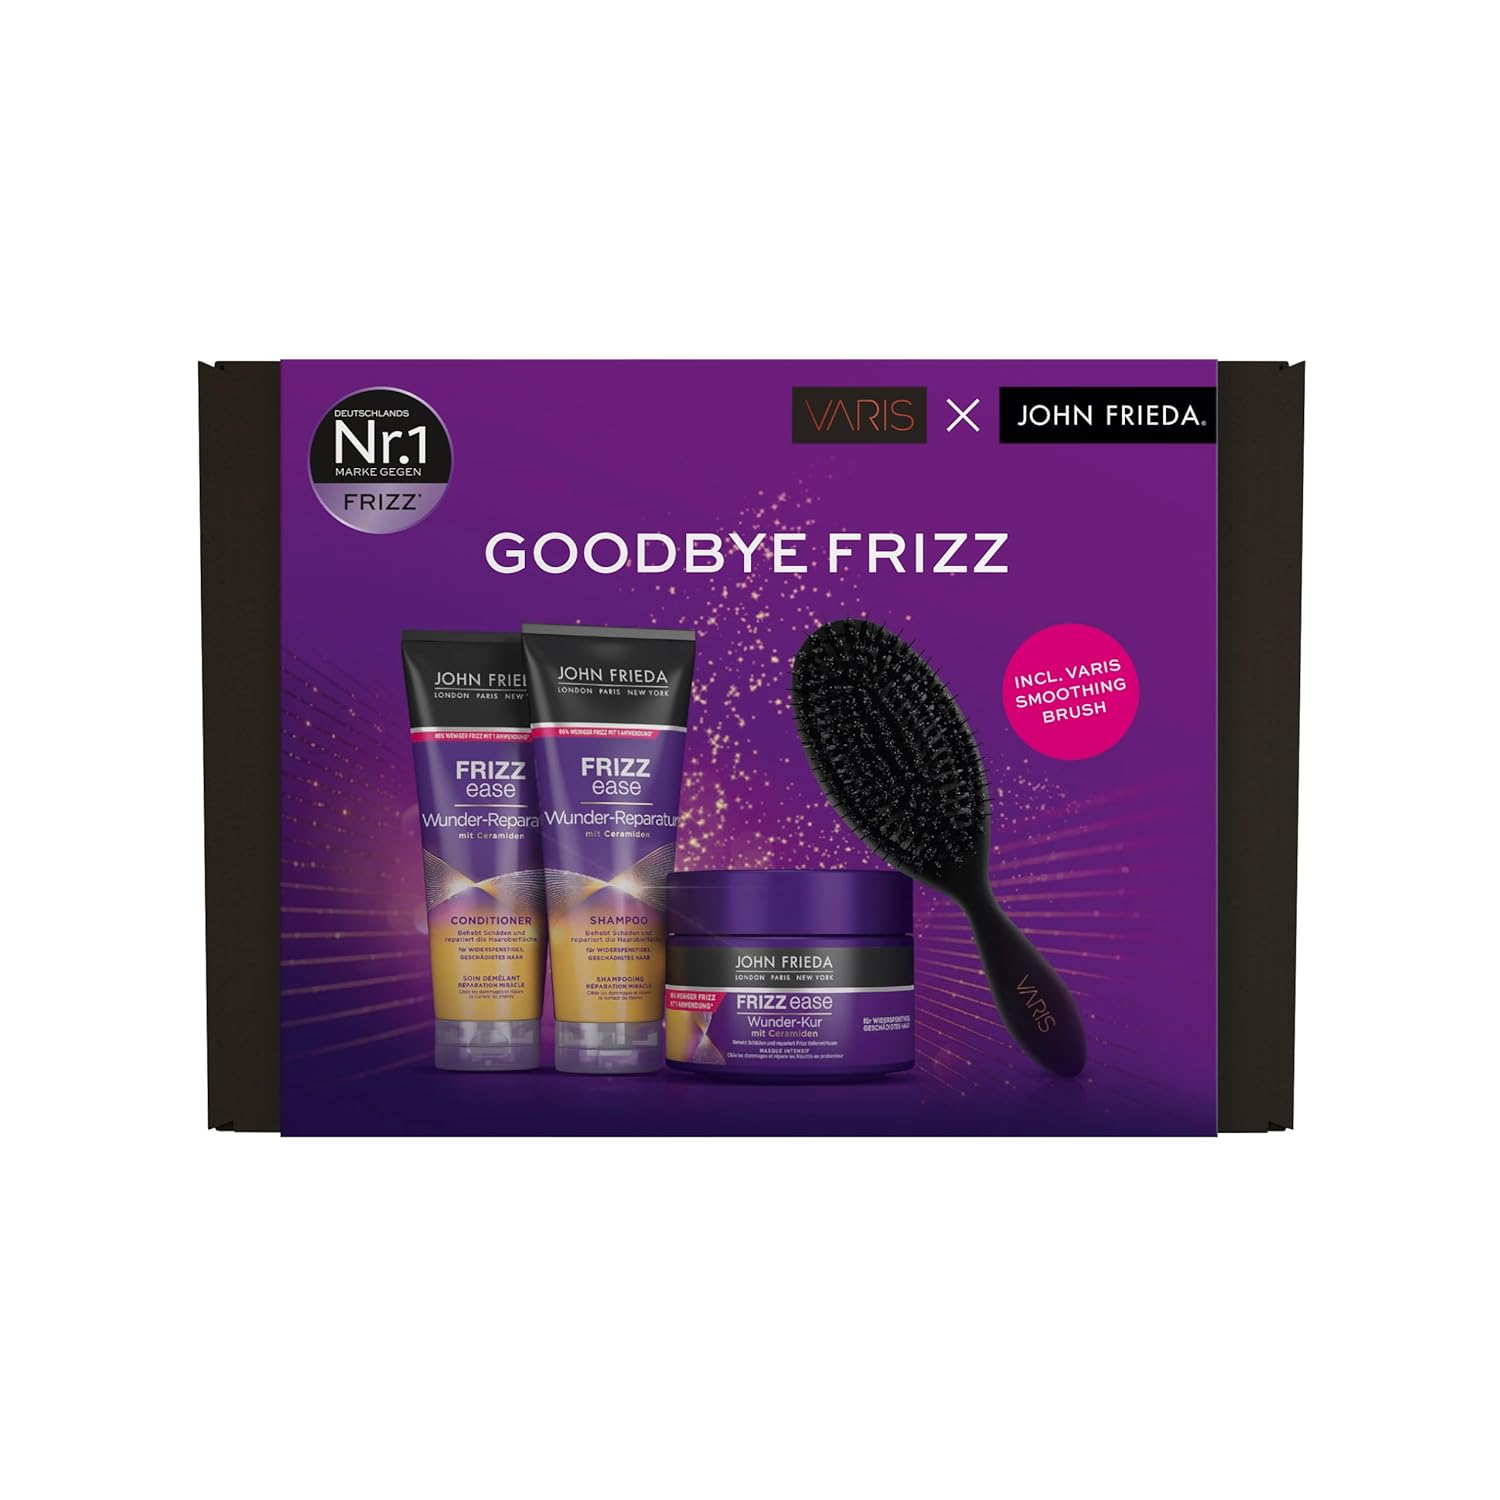 John Frieda X Varis Miracle Repair Value Set - Content: Shampoo, 250ml/Conditioner, 250ml/Miracle Treatment, 250ml/Varis Smoothing Brush Hair Brush - Frizz Ease Series - Stylist -Inspireded